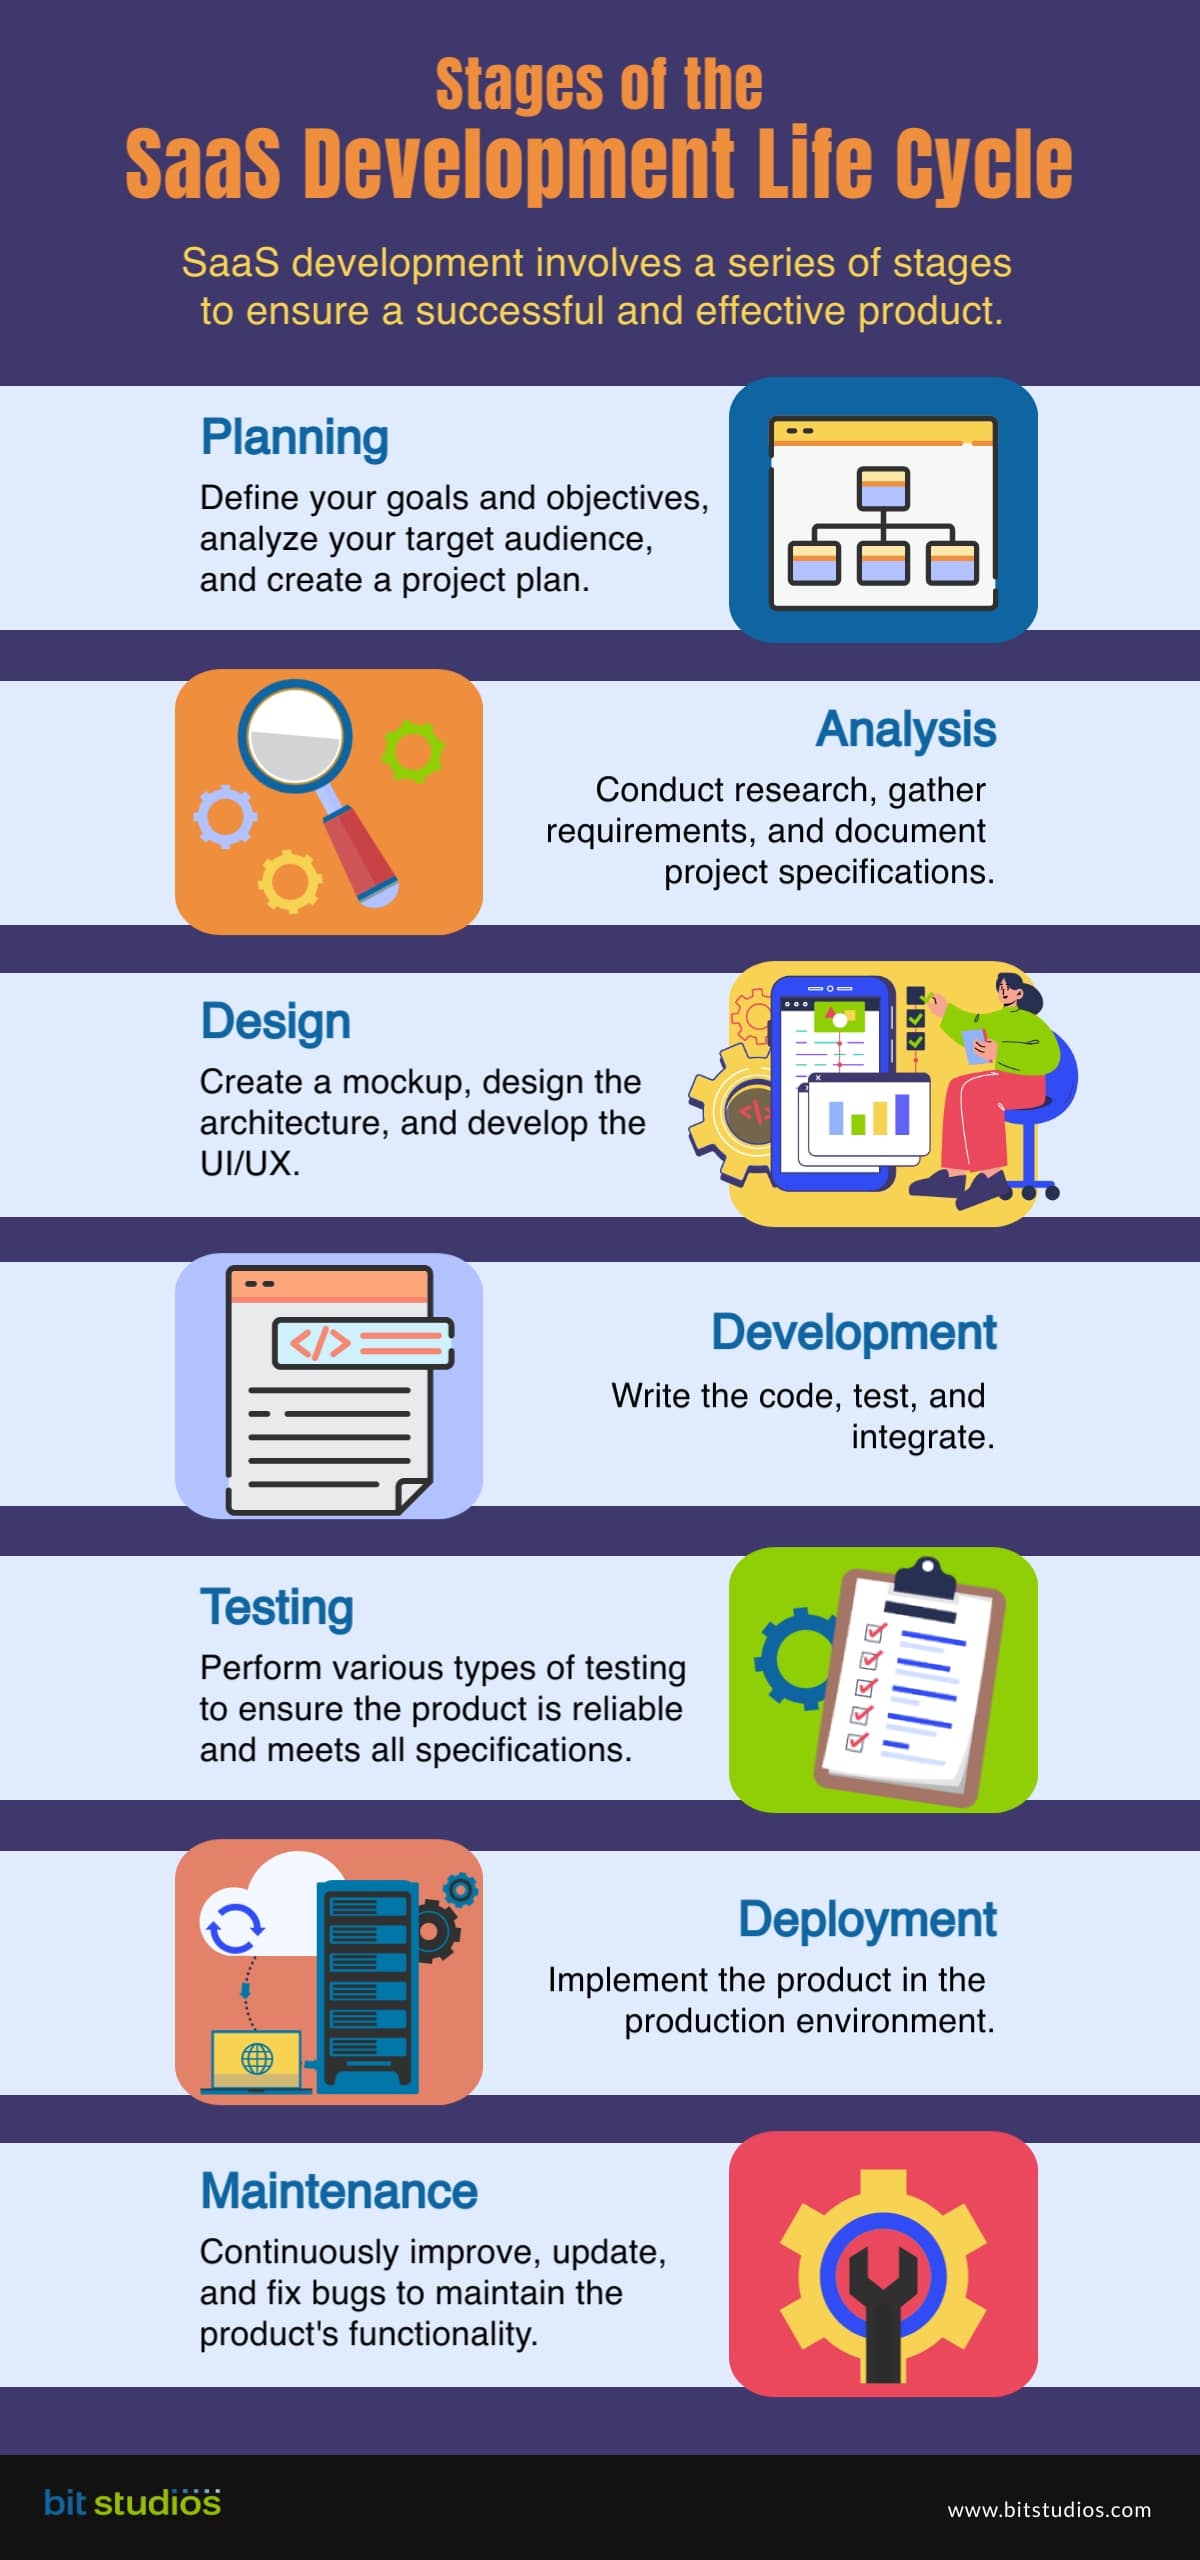 What Are the Stages of the SaaS Software Development Life Cycle? - Stages of the SaaS Development Life Cycle - BIT Studios